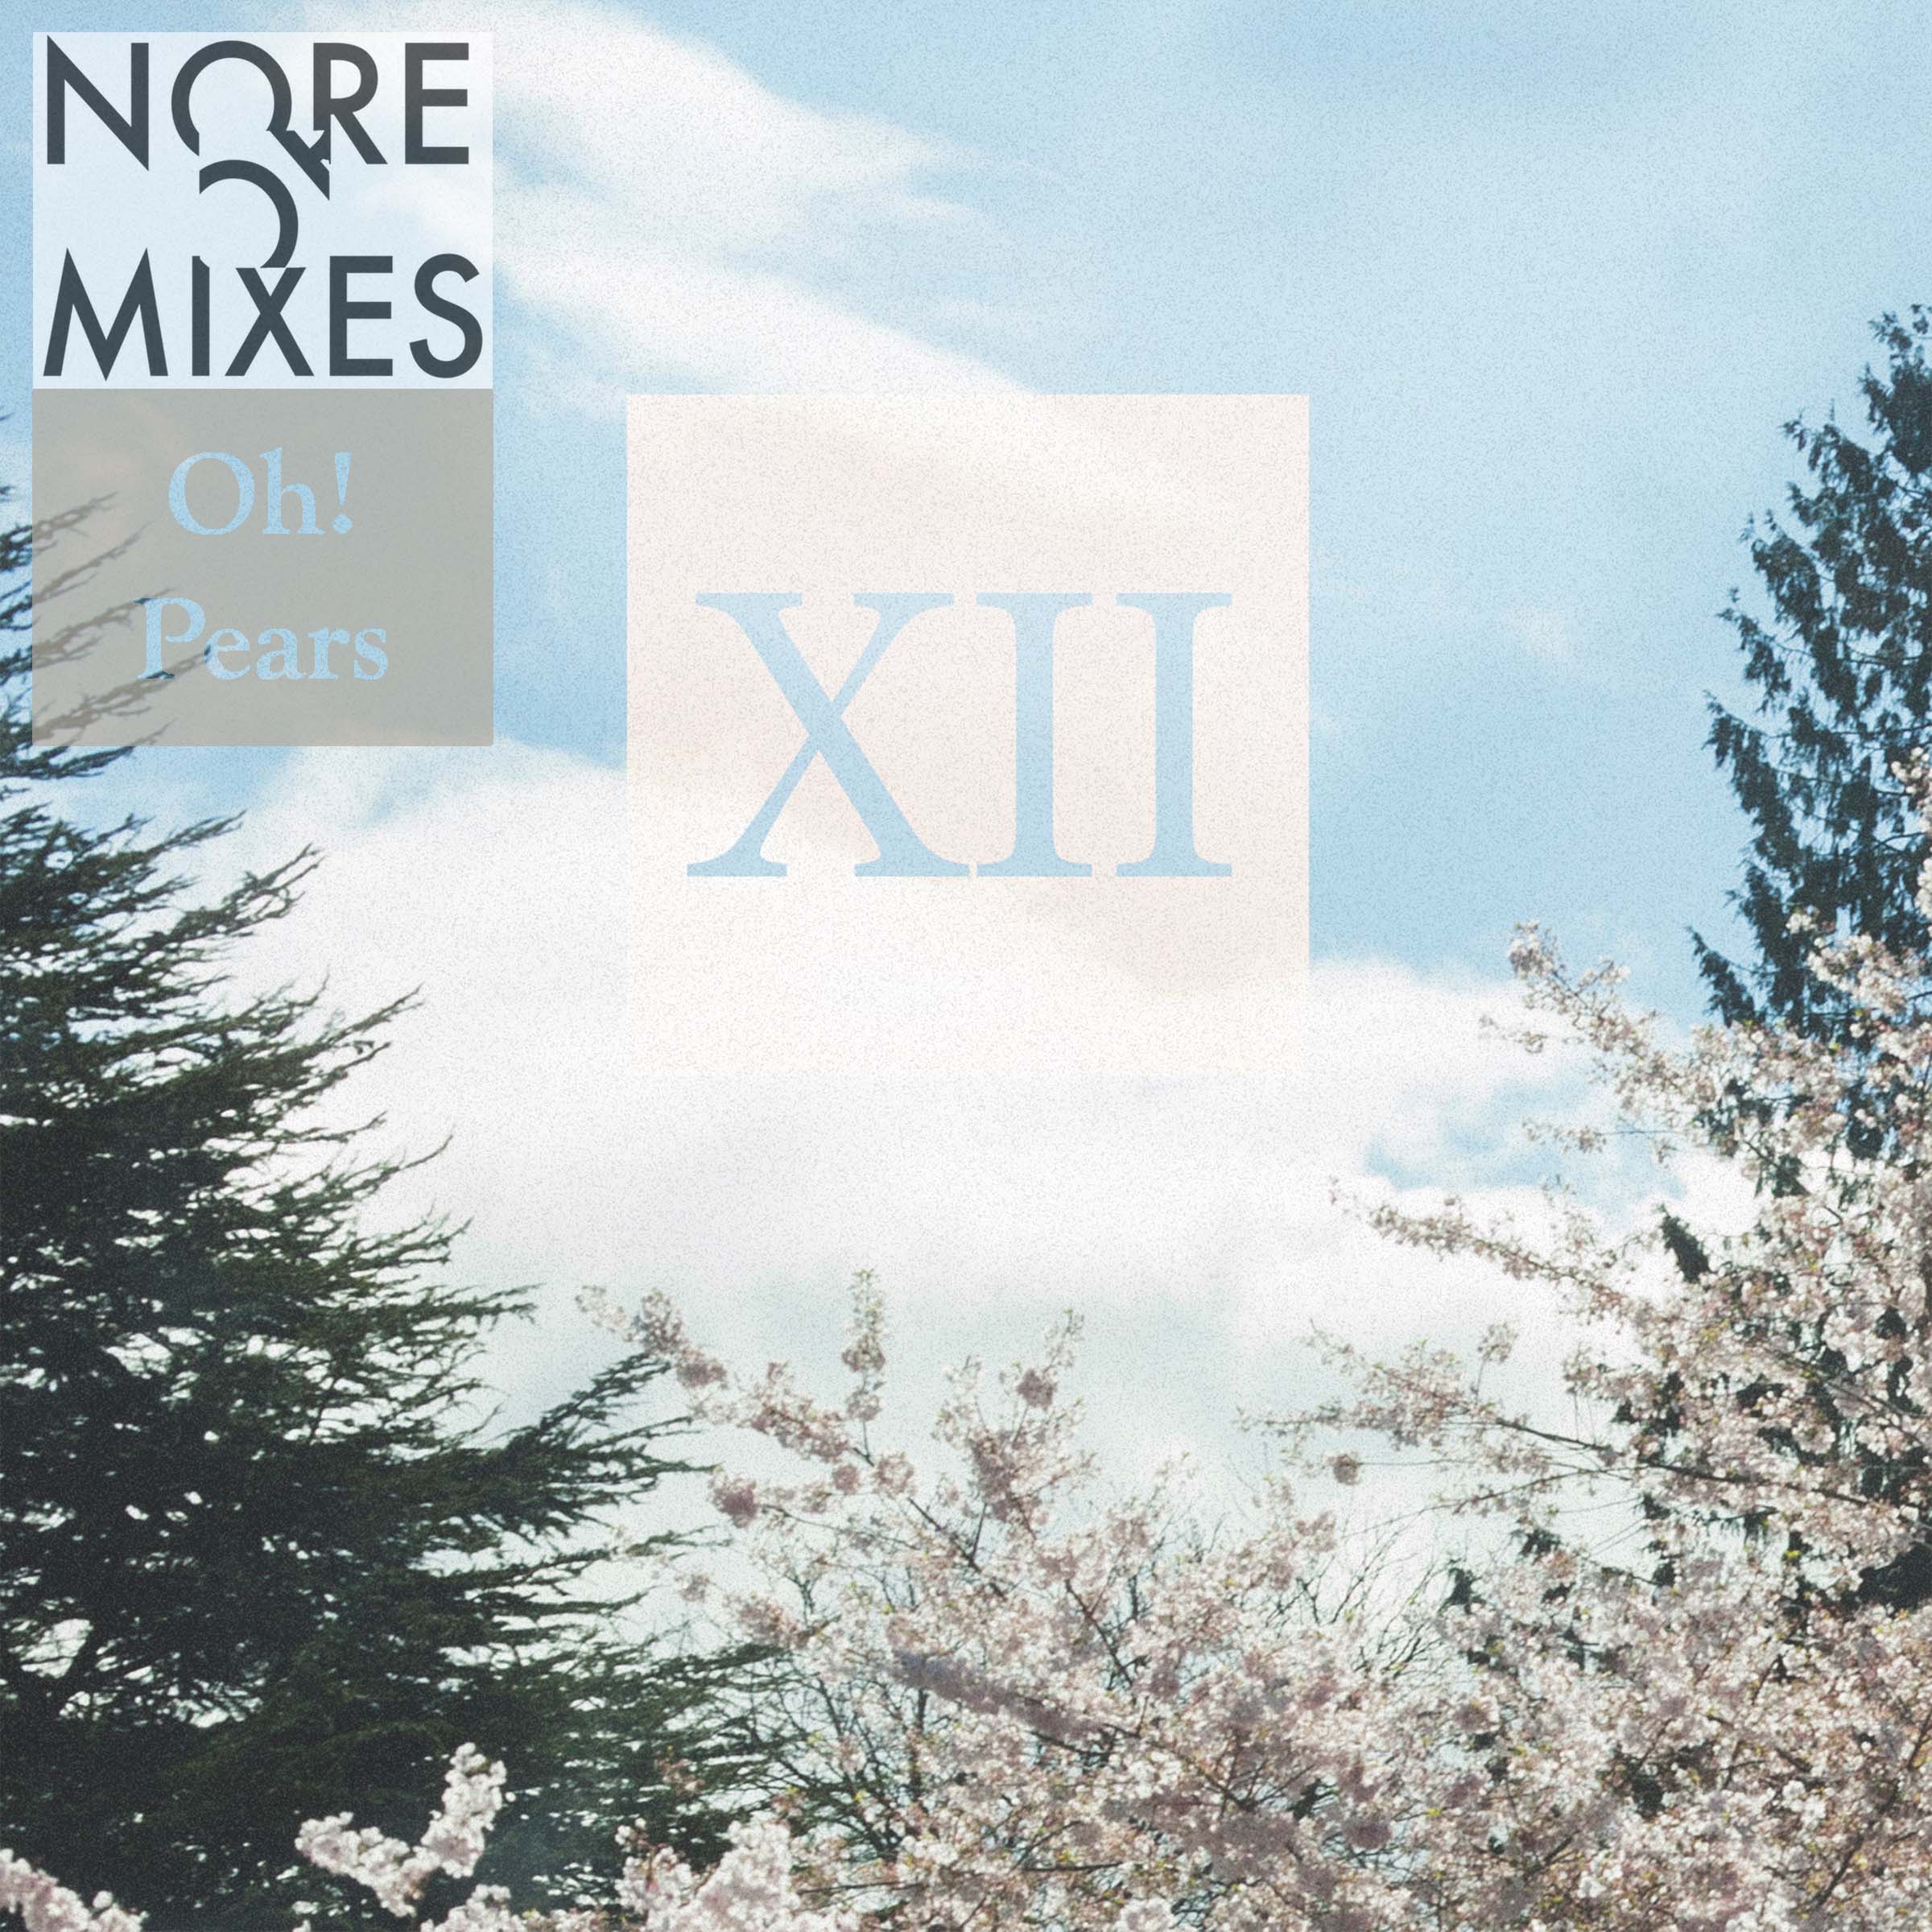 Oh! Pears – XII (nore009)